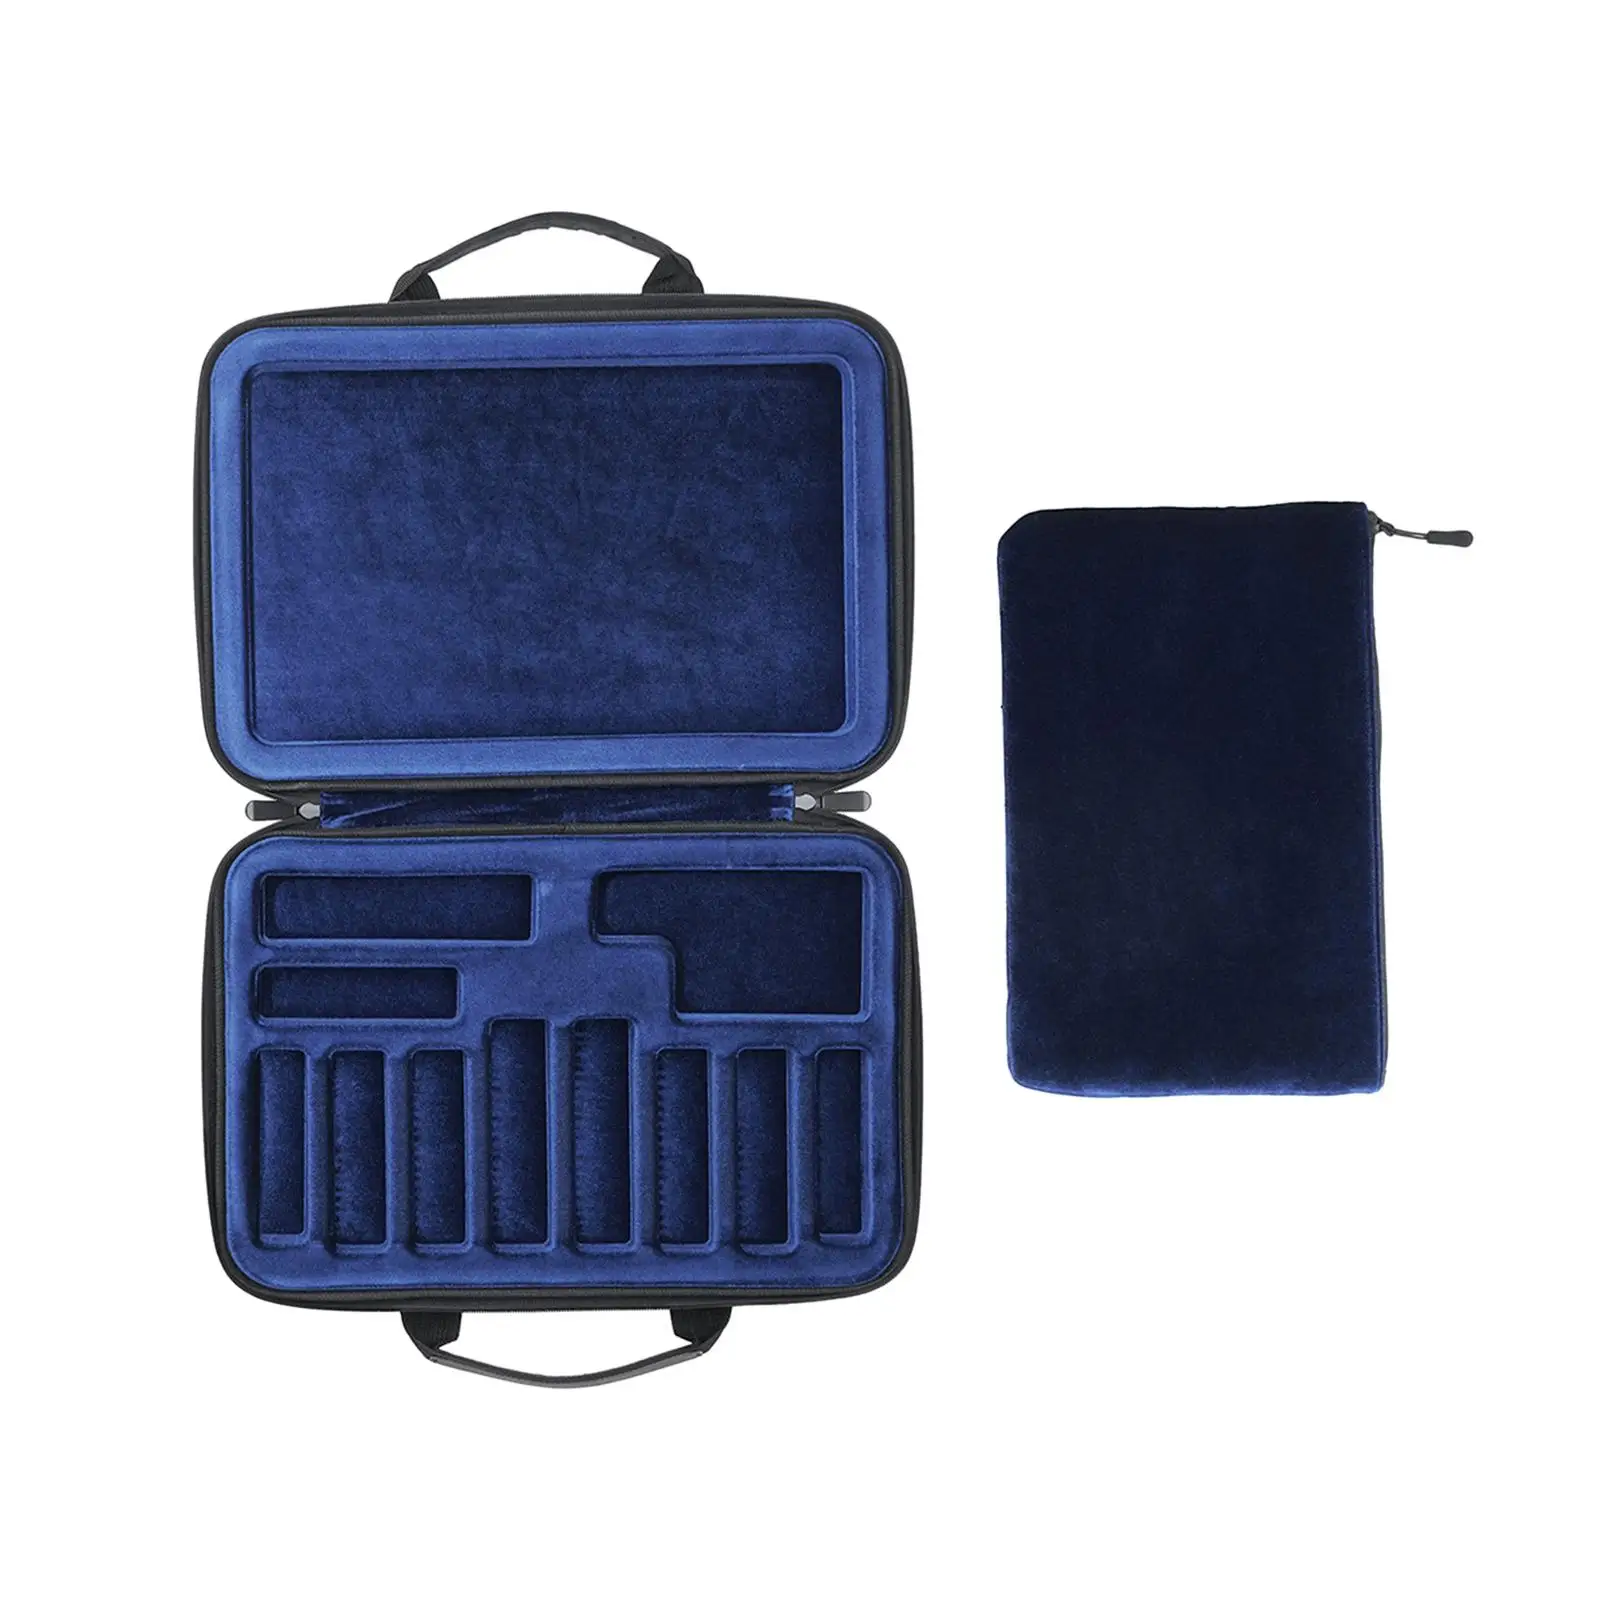 Saxphone Mouthpiece Case Storage Bag Oxford Cloth with Flannel Bag Zipper Closure Shock Absorbing Saxophone Reed Case Handbag